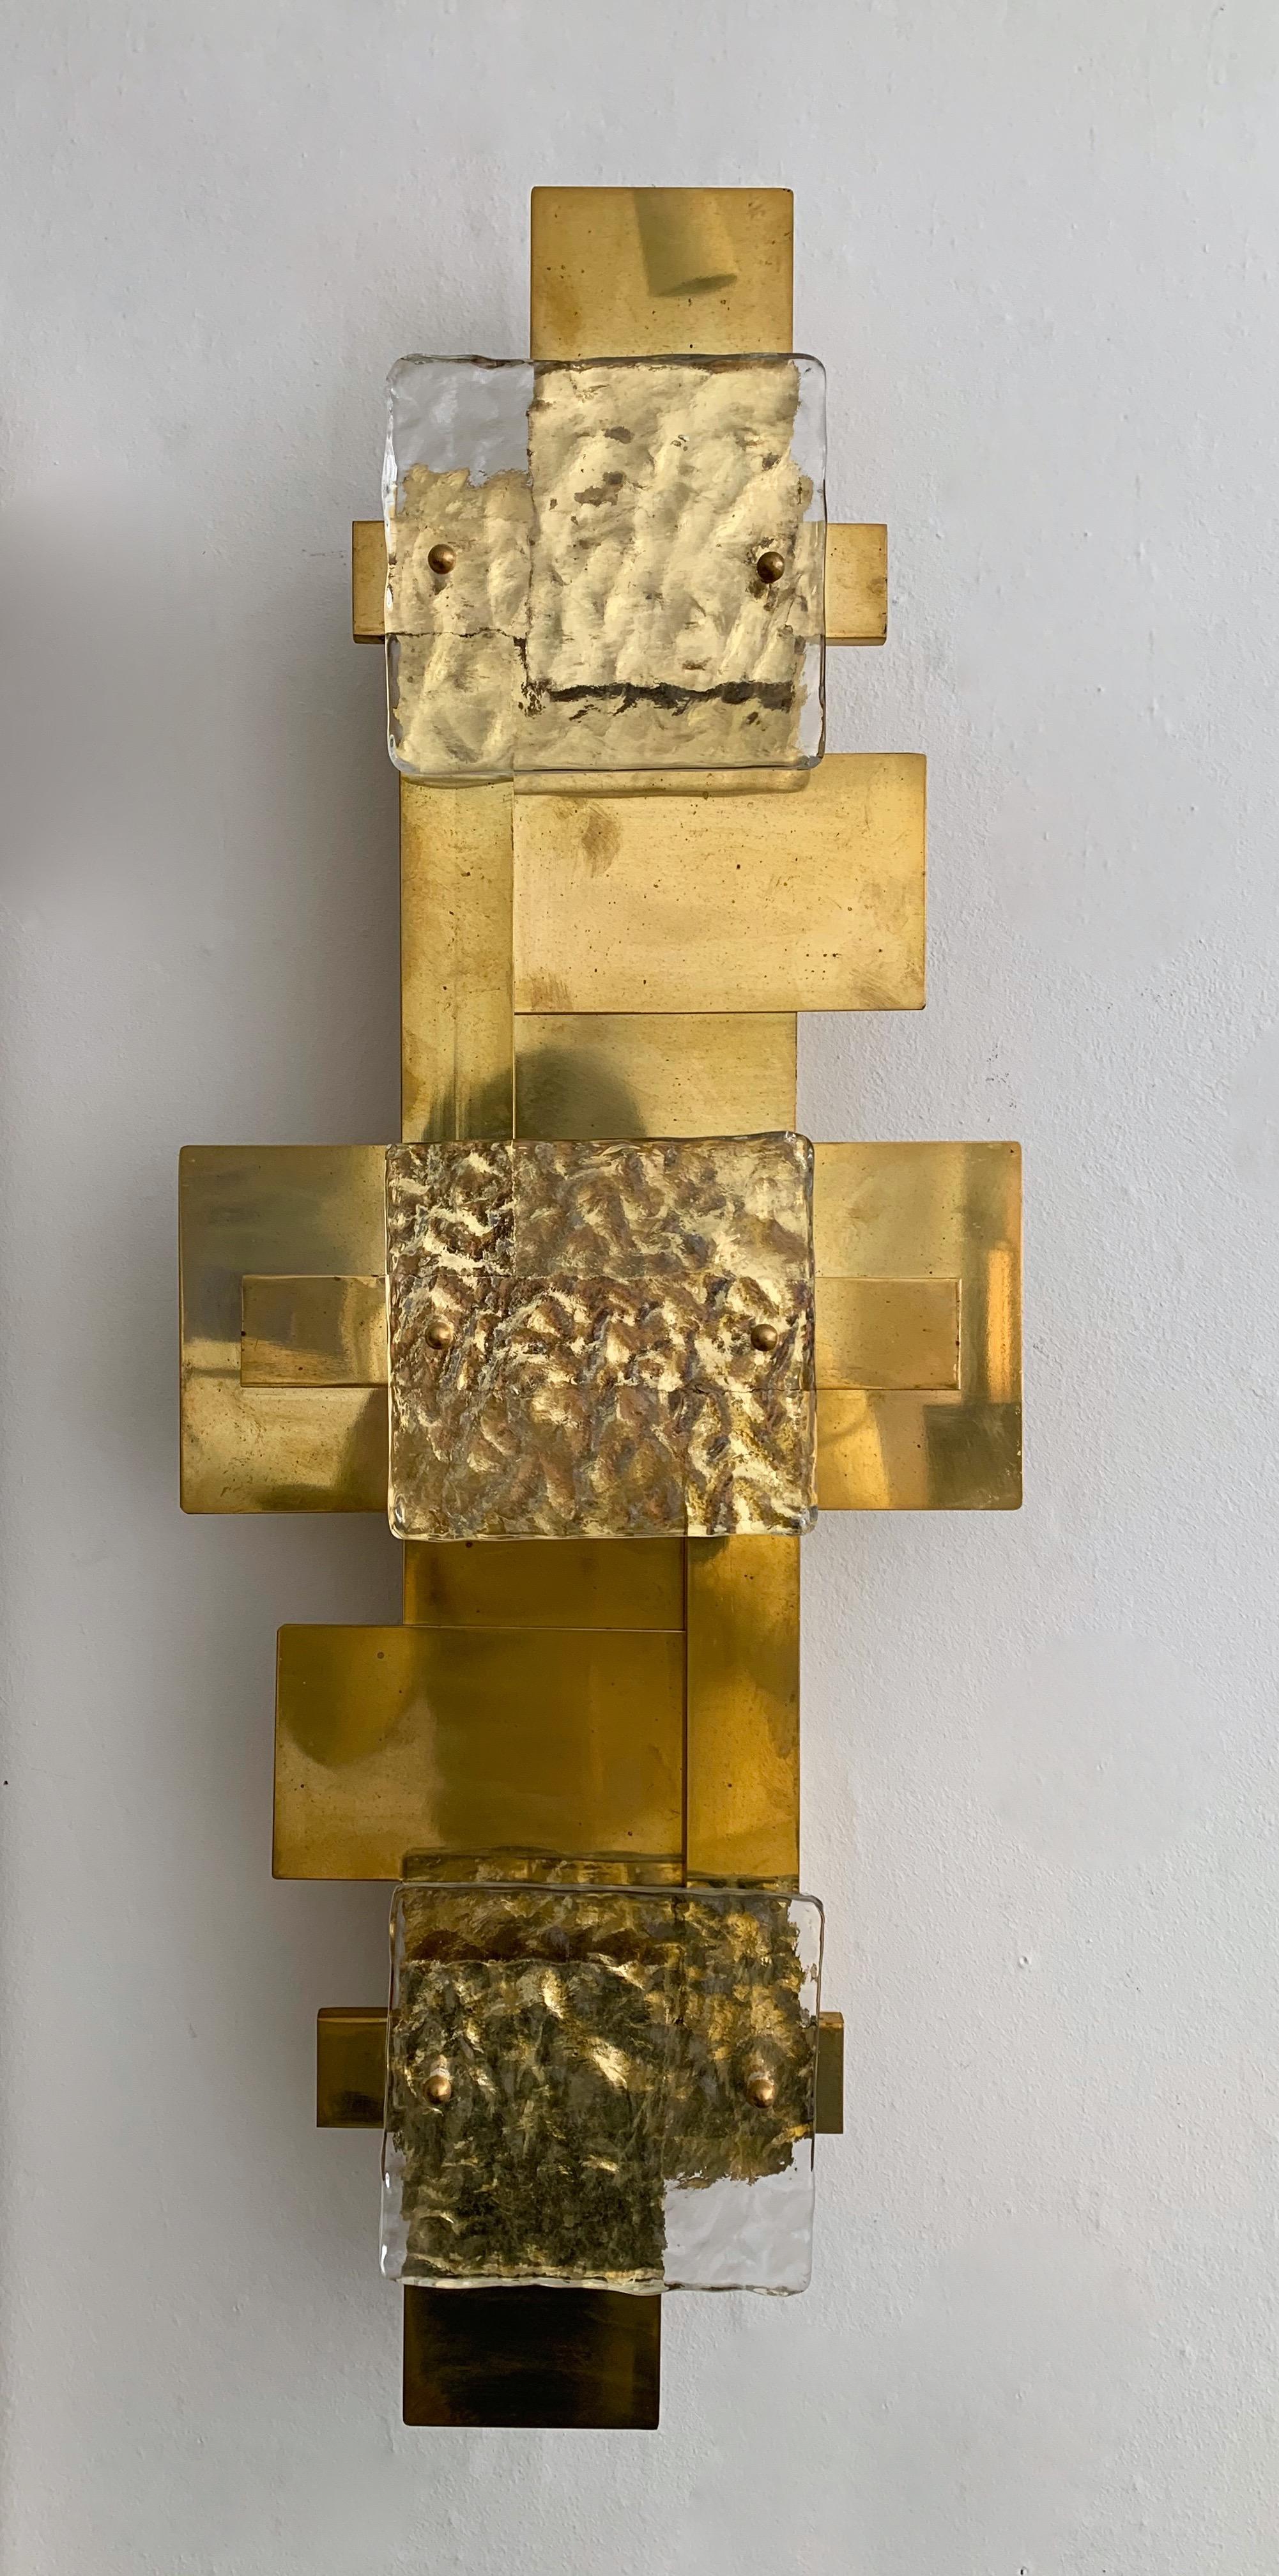 Pair of sconces wall lamps light panels or ceiling flushmount chandelier. Contemporary work, small Italian workshop, few exclusive productions. Full brass and murano glass. In the style of Reggiani, Sciolari, Palwa, Kinkeldey, Hollywood Regency,